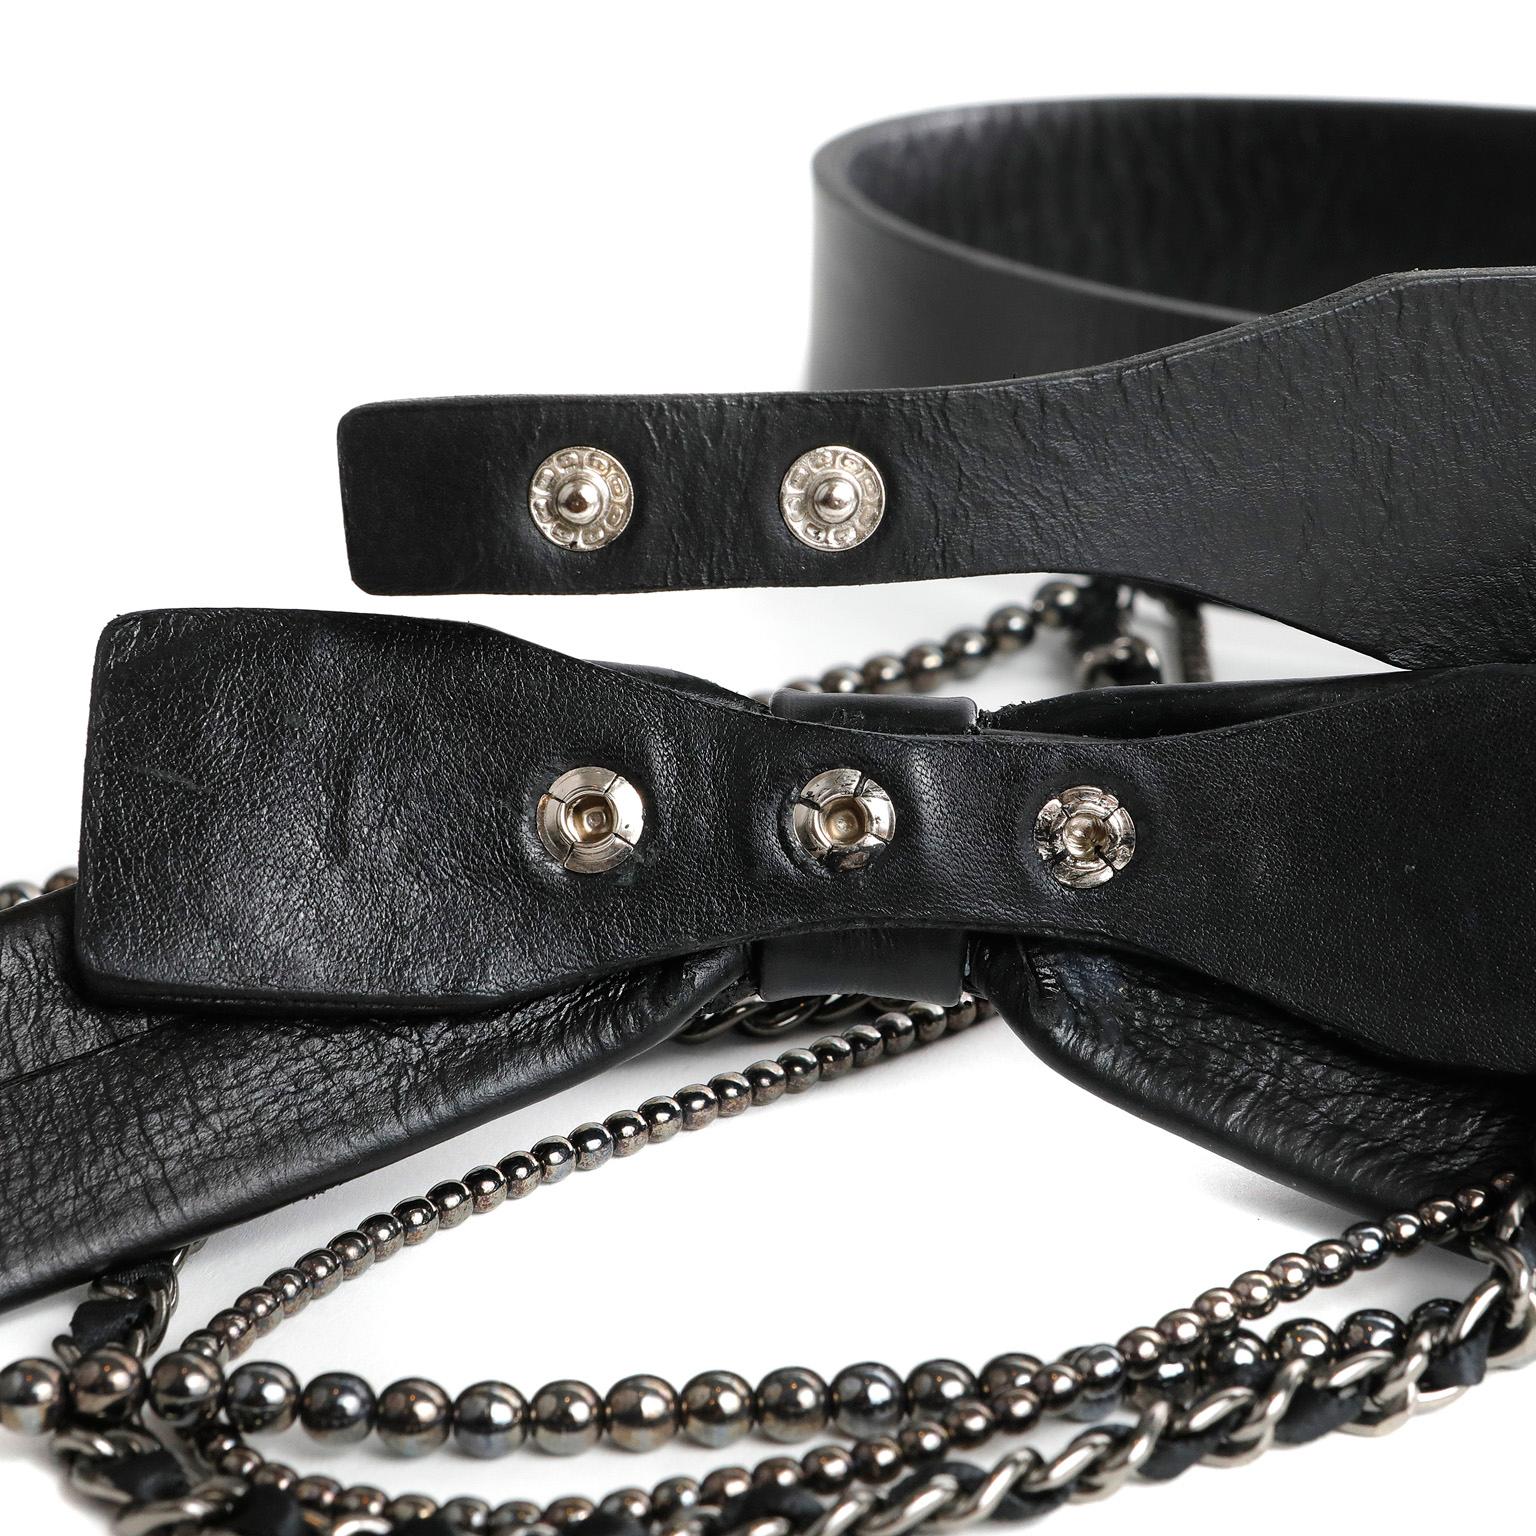 Women's Chanel Black Leather Bow Belt with Chains For Sale